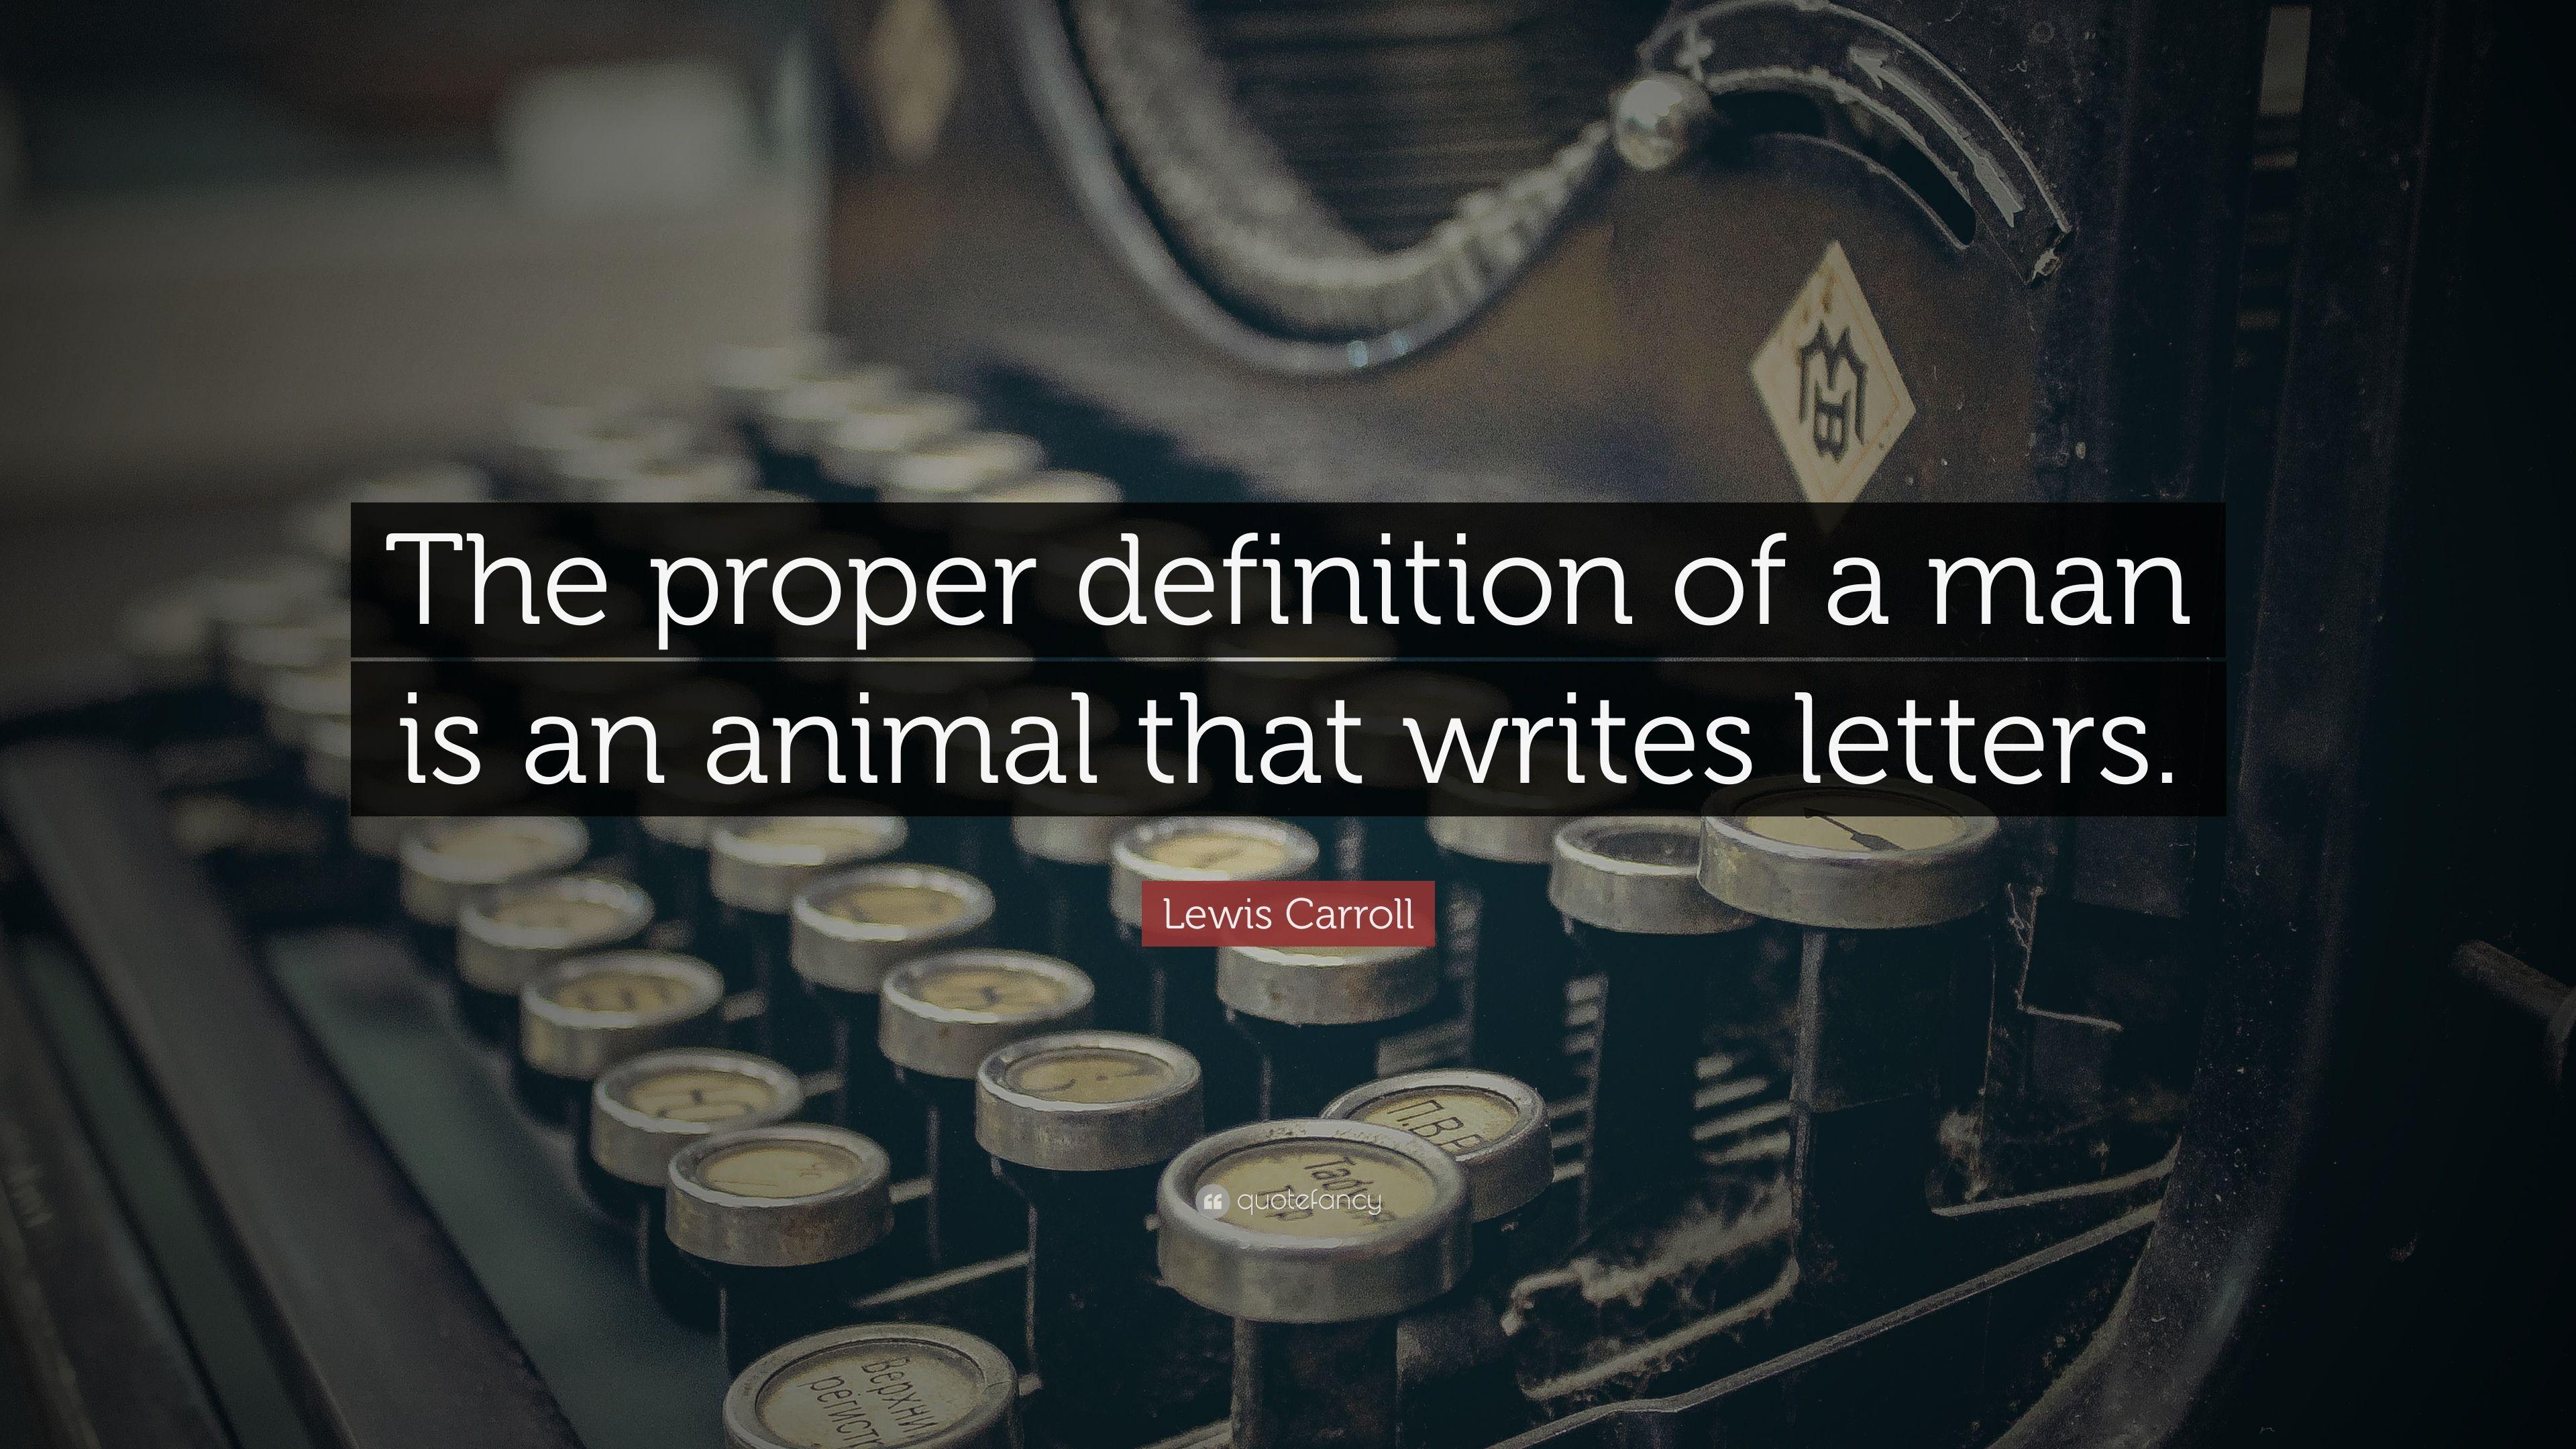 Lewis Carroll Quote: “The proper definition of a man is an animal